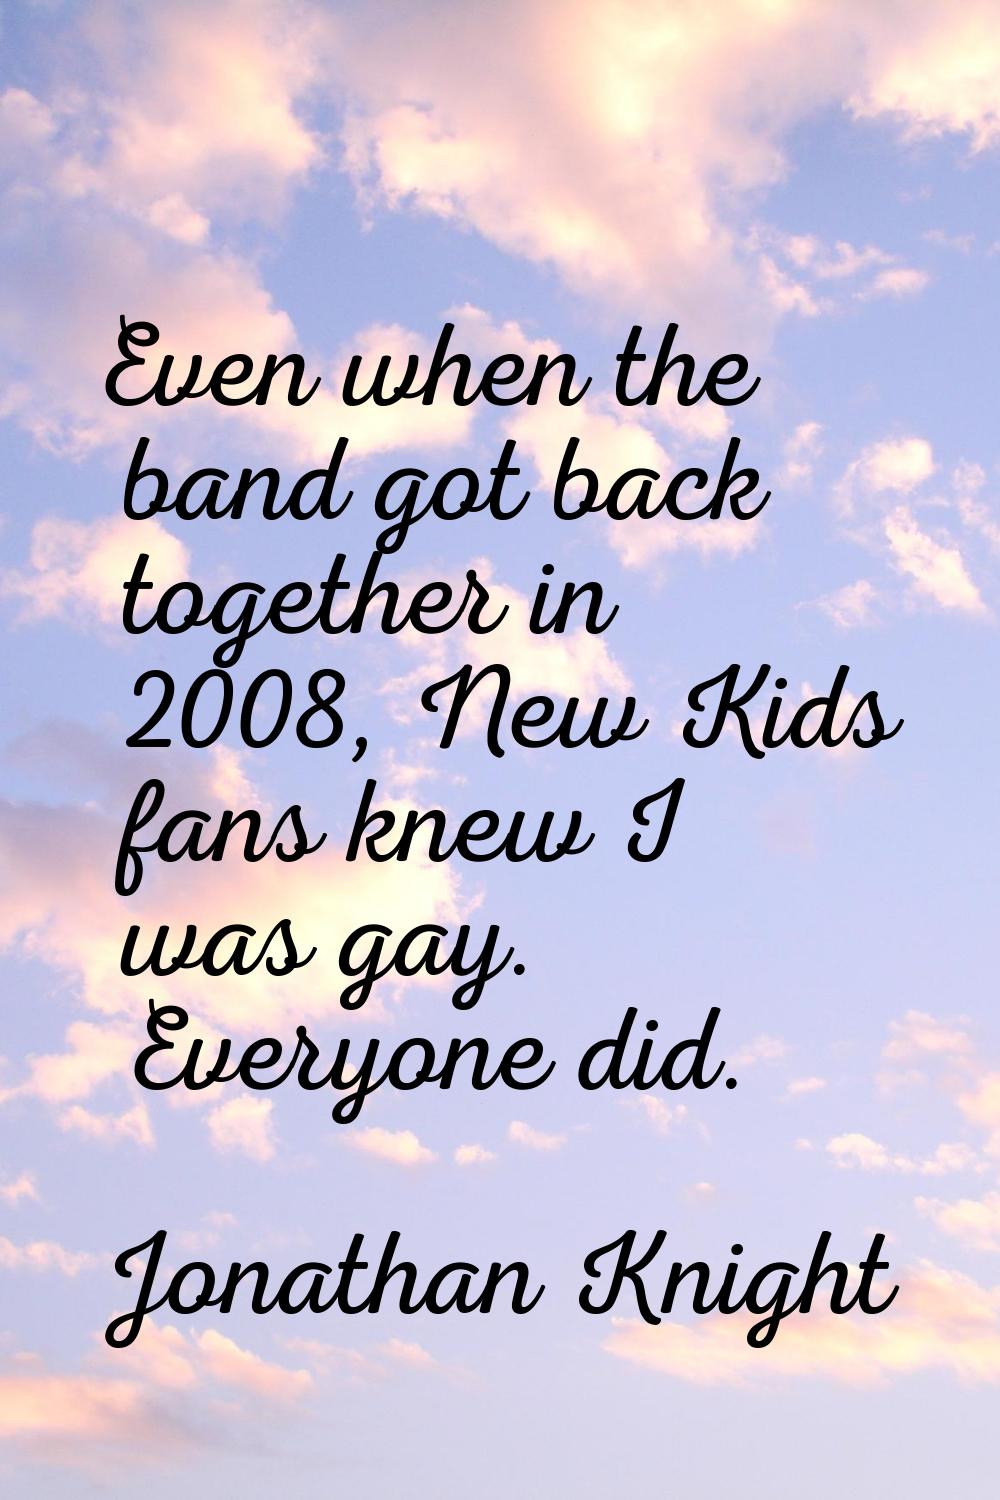 Even when the band got back together in 2008, New Kids fans knew I was gay. Everyone did.